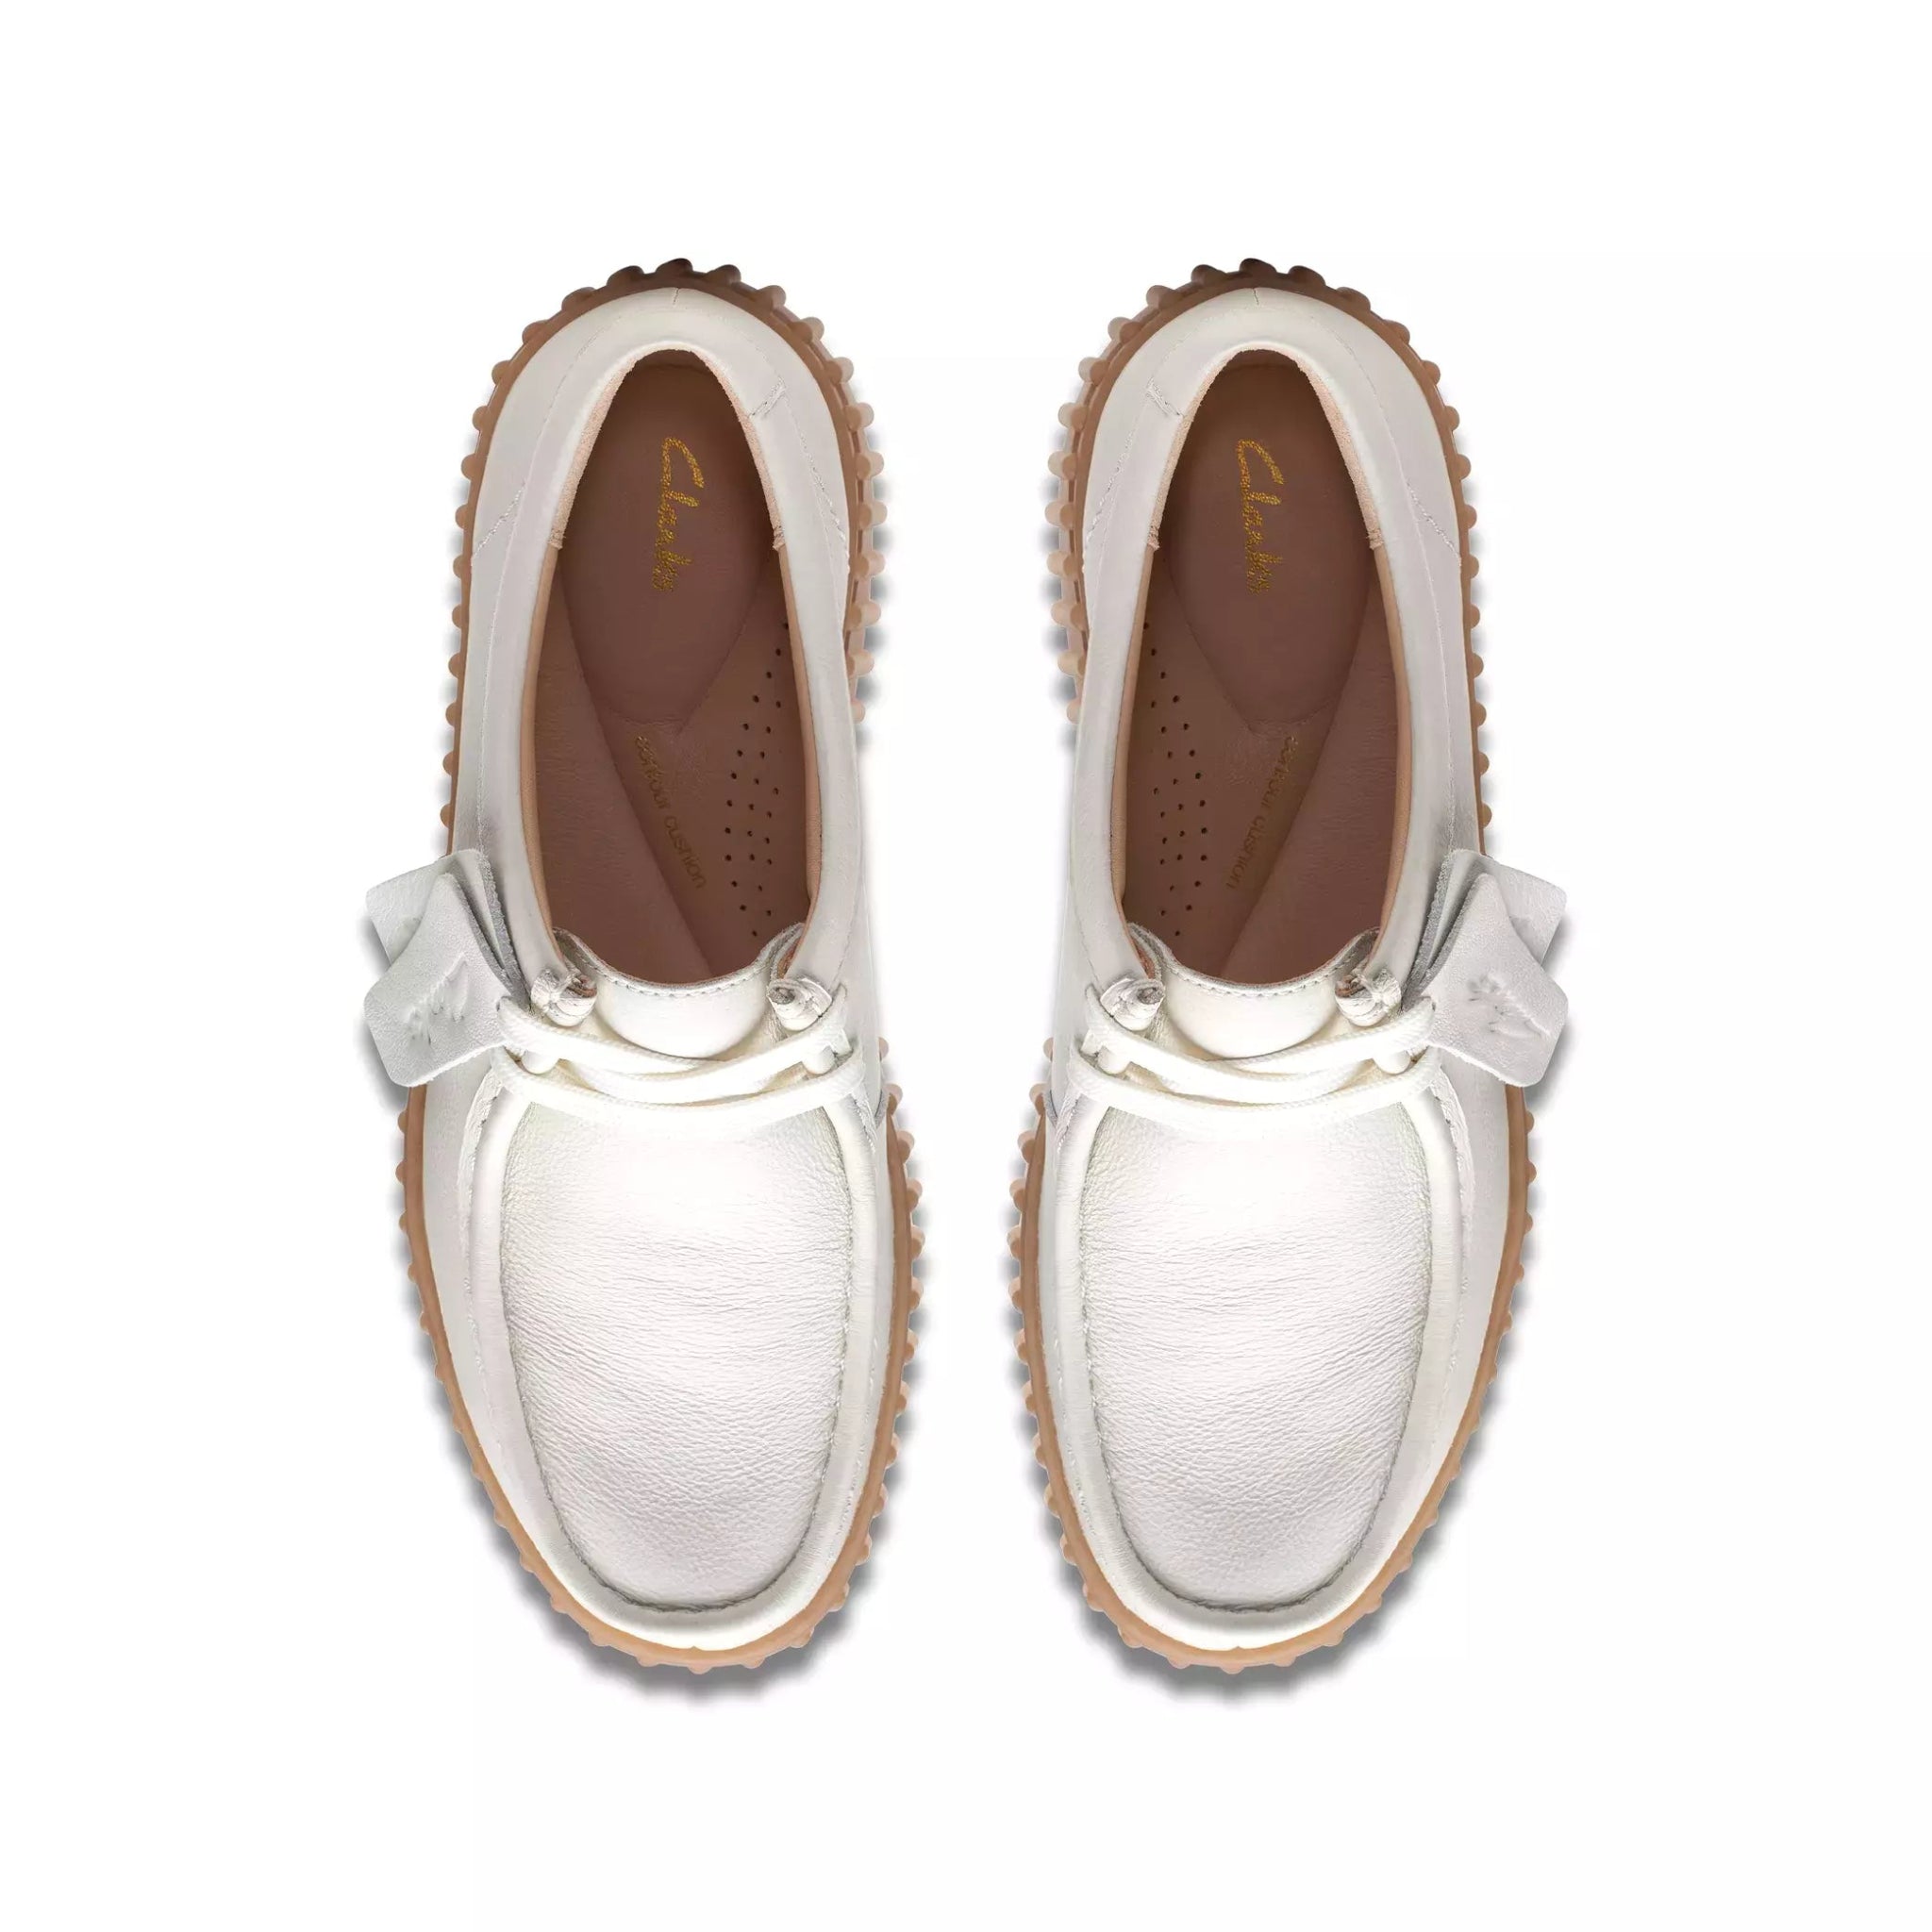 'Torhill Bee' women's lace-up shoe - off white - Chaplinshoes'Torhill Bee' women's lace-up shoe - off whiteClarks